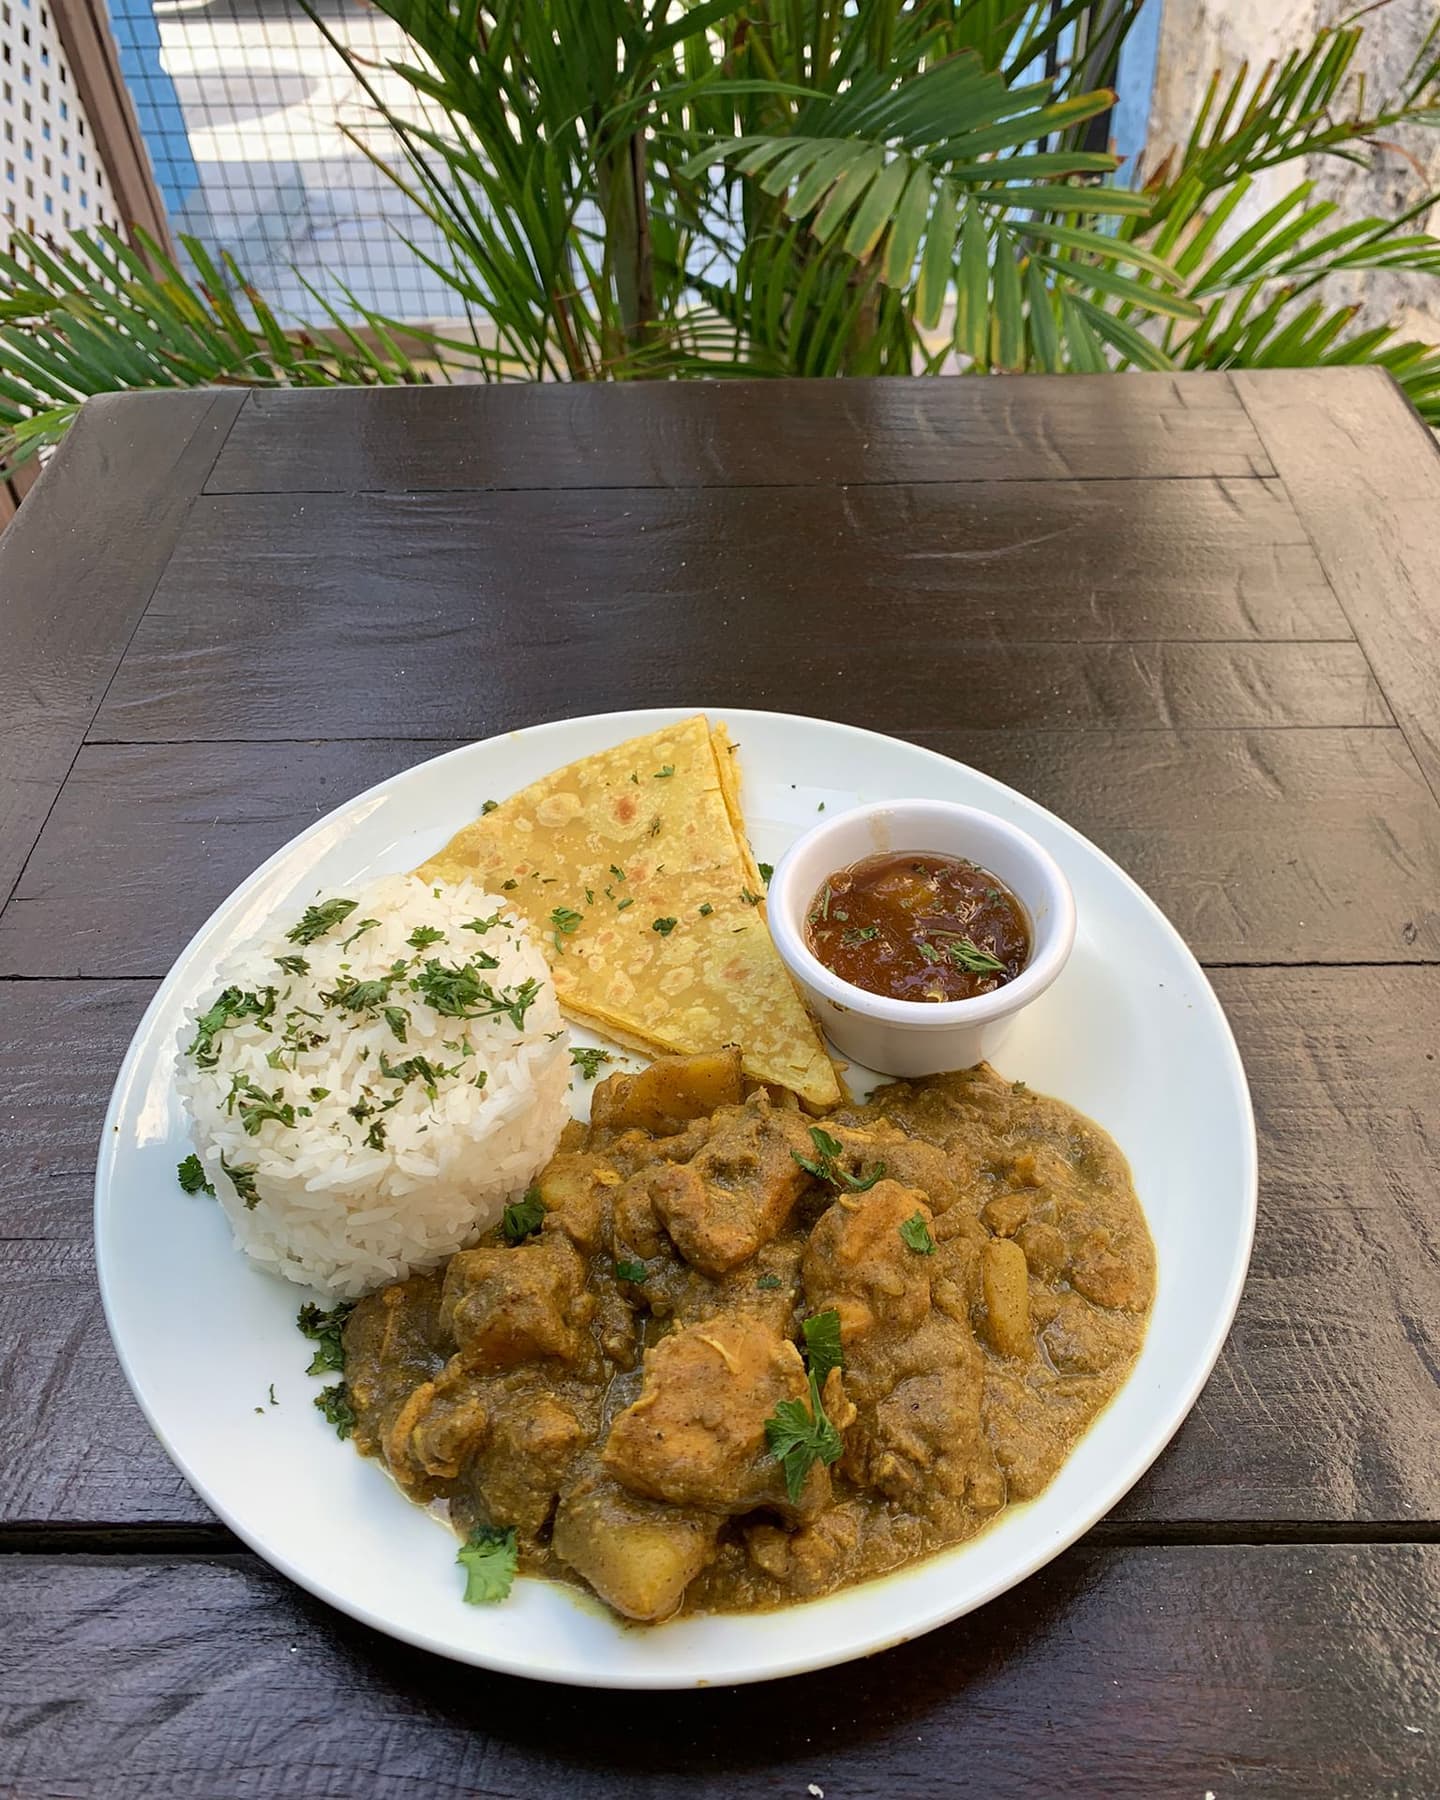 Best Popular Foods to try on Vacation in Barbados